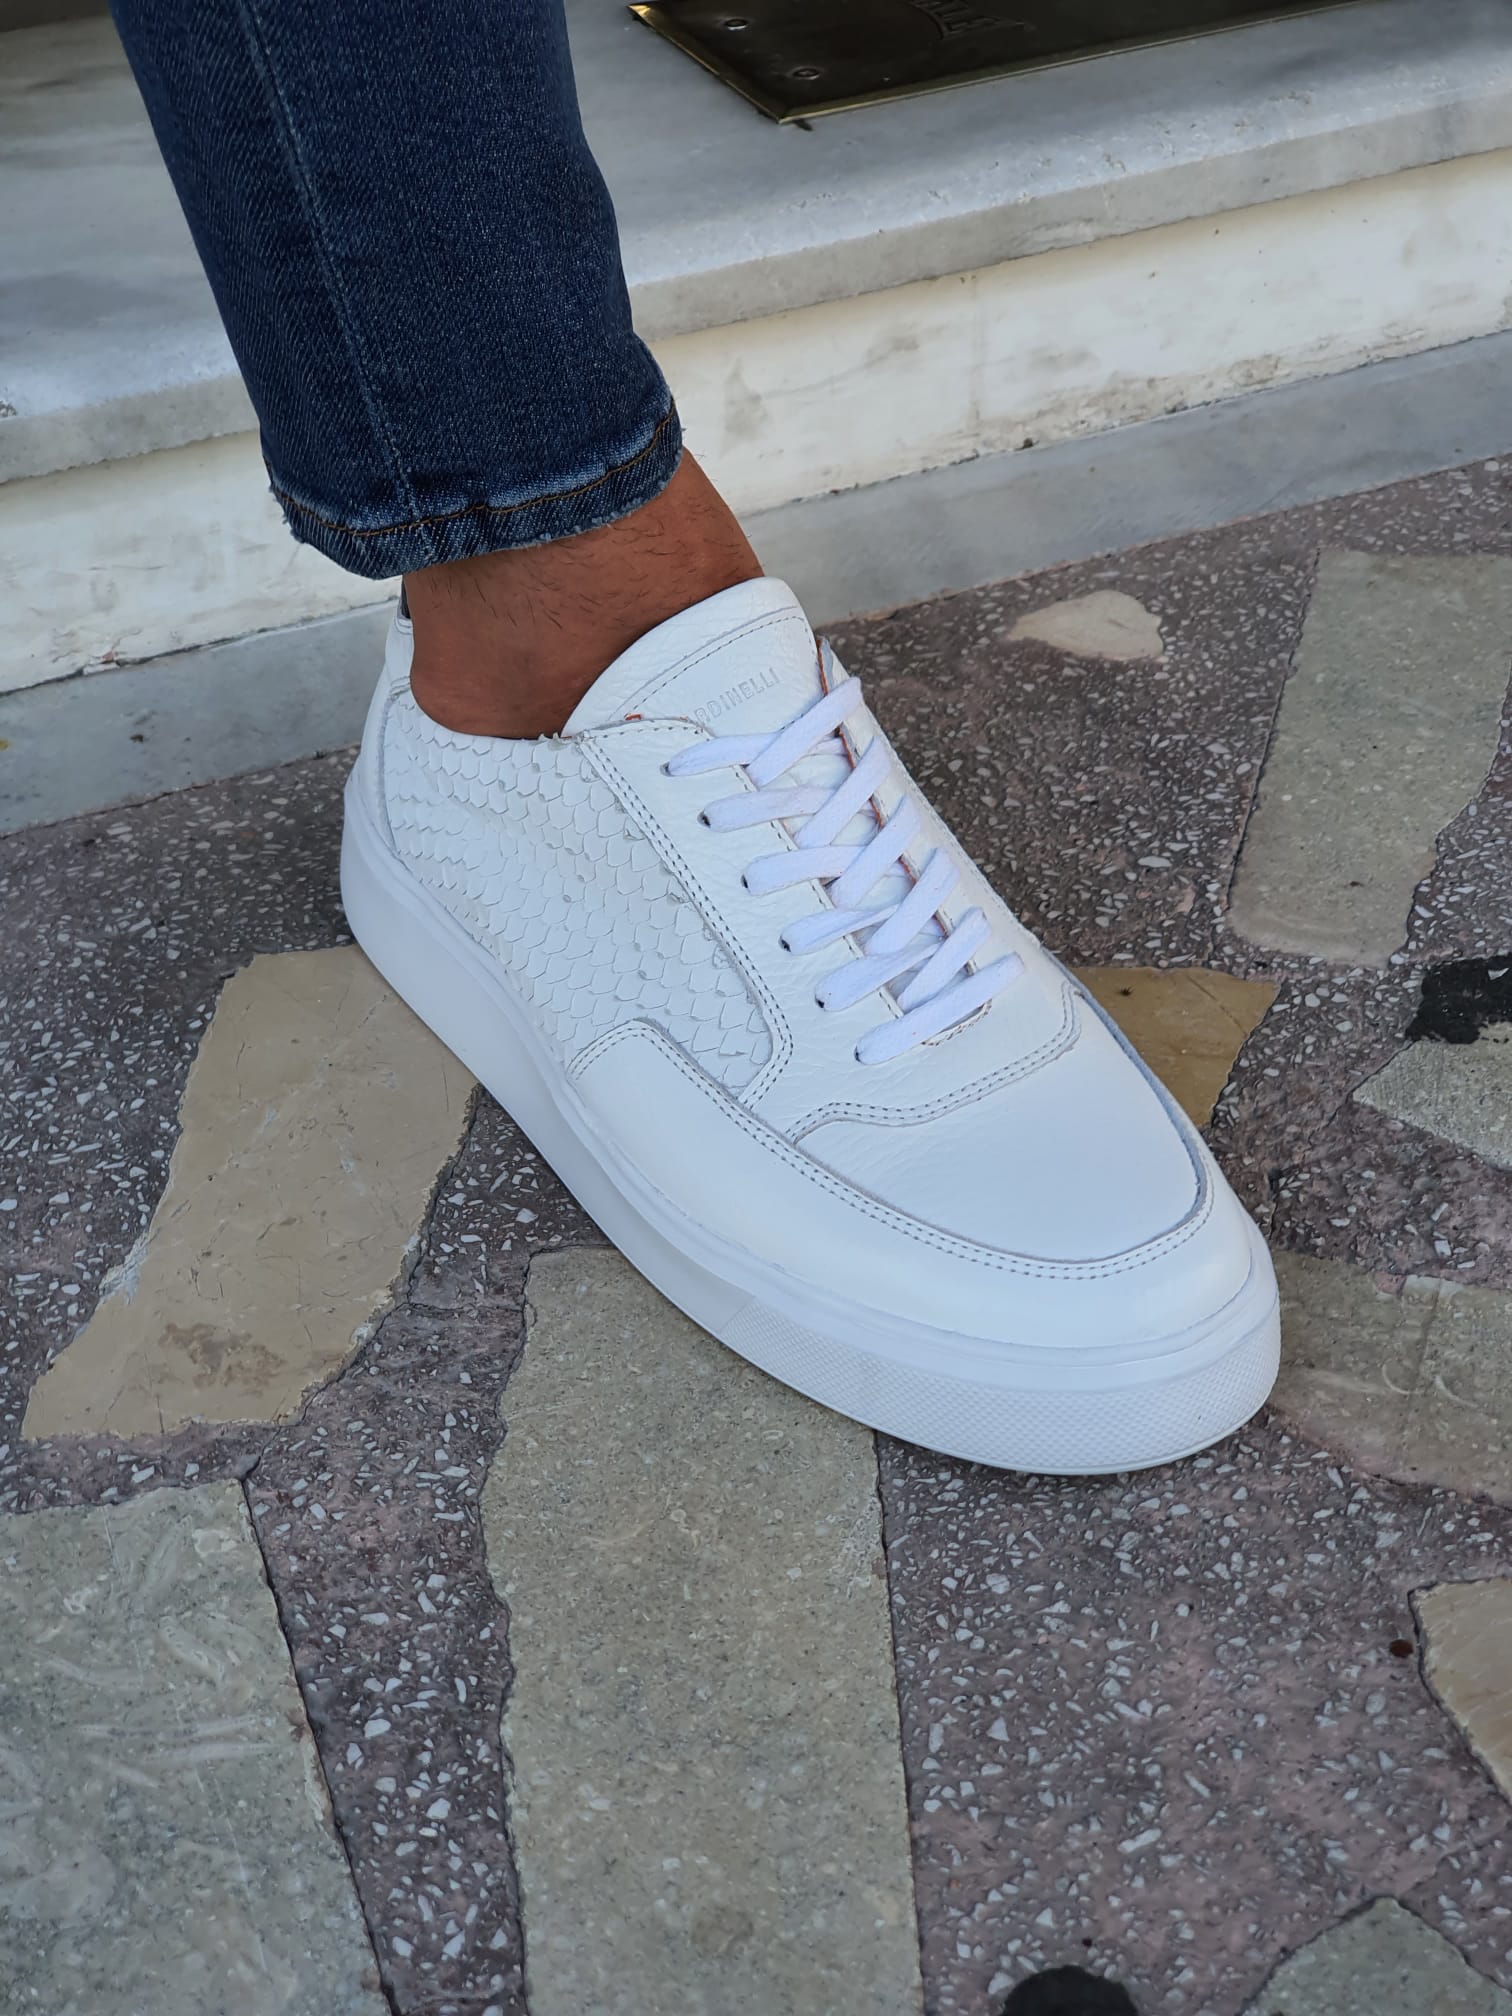 WHITE CLOUD SPECIAL EDITION* EVA SOLE LEATHER SHOES